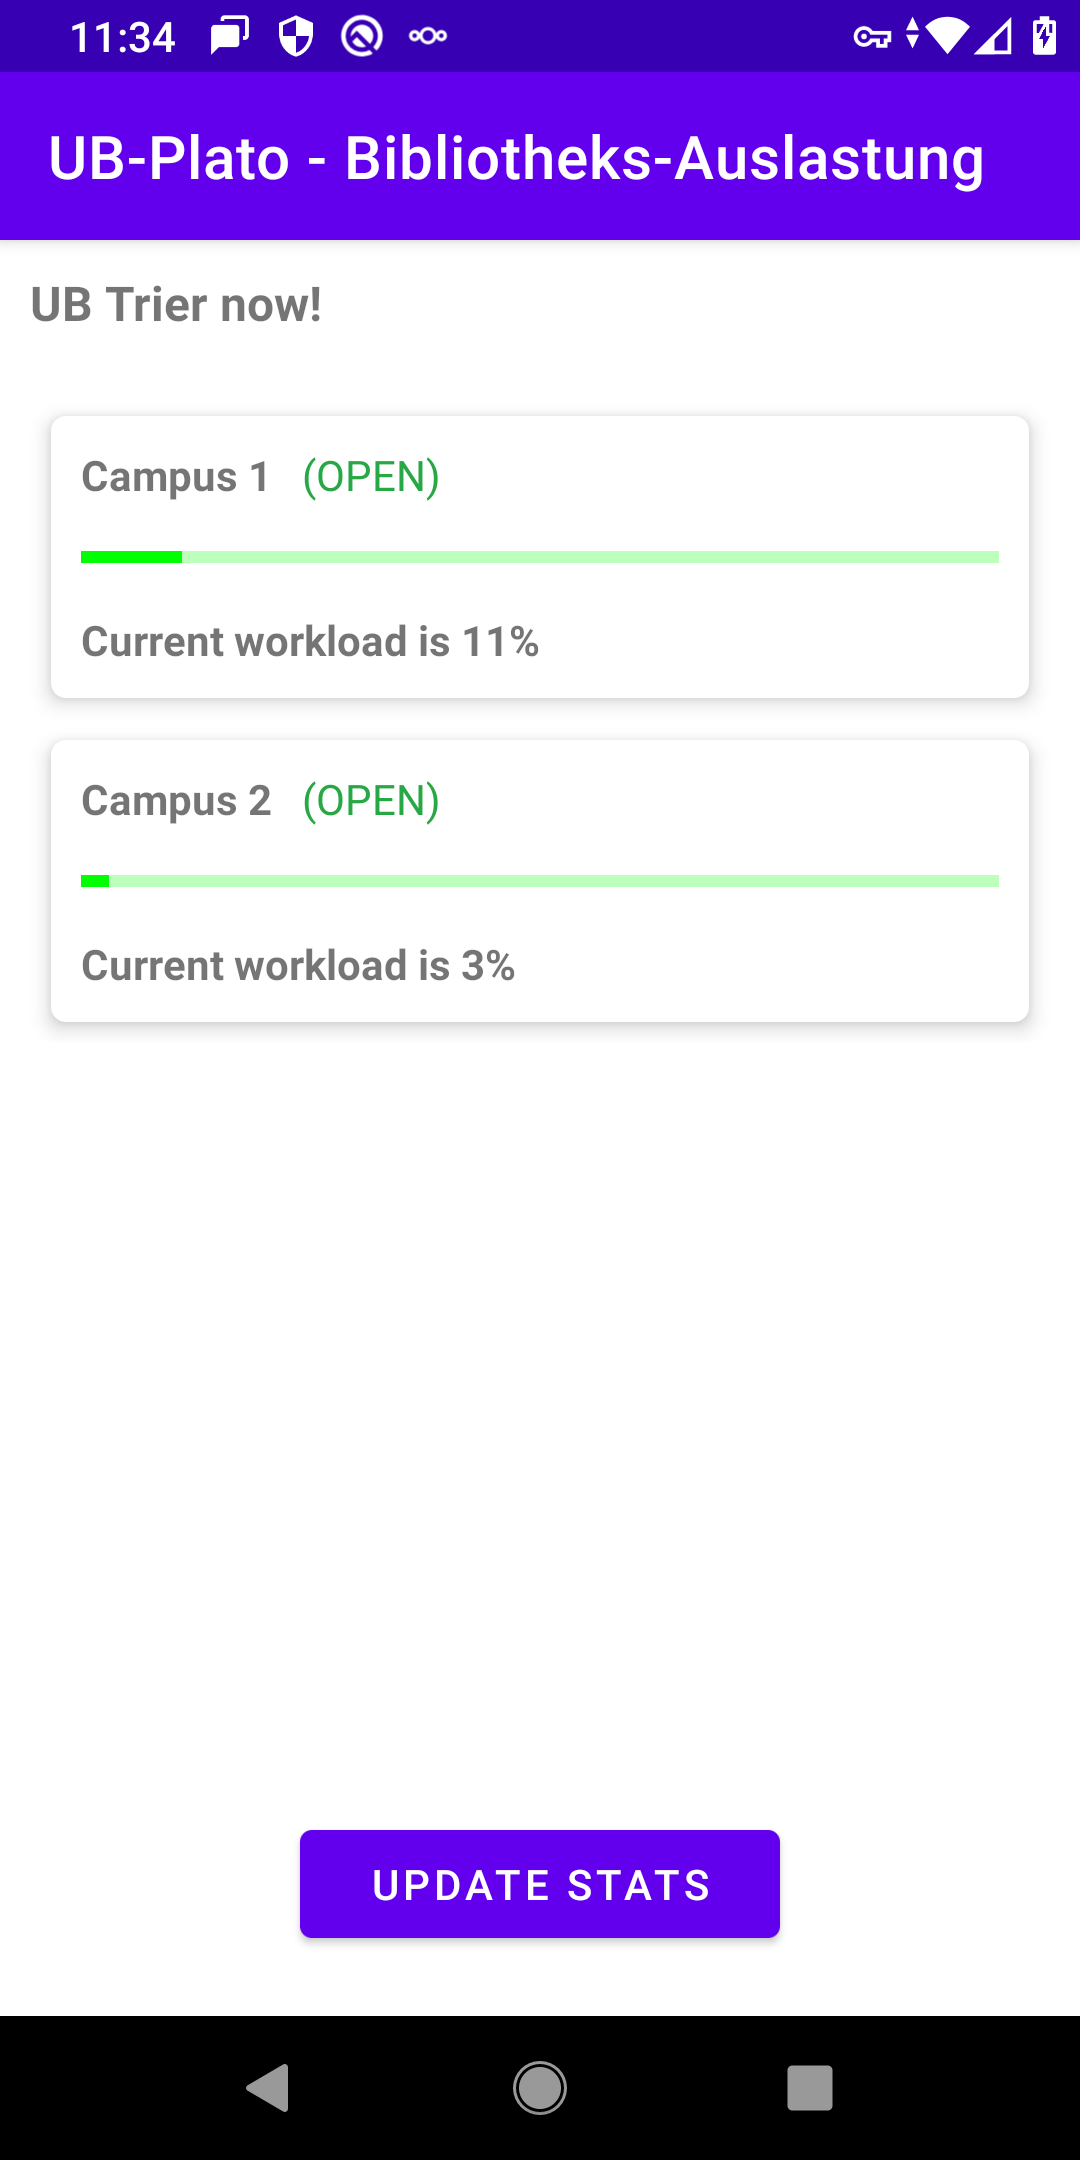 Shows the general UI with two rooms (Campus I and II of the University Library Trier) with current utilisation in a utilisation graph (libraries are open, utilisation at 11% and 3% with the coloured representation green').